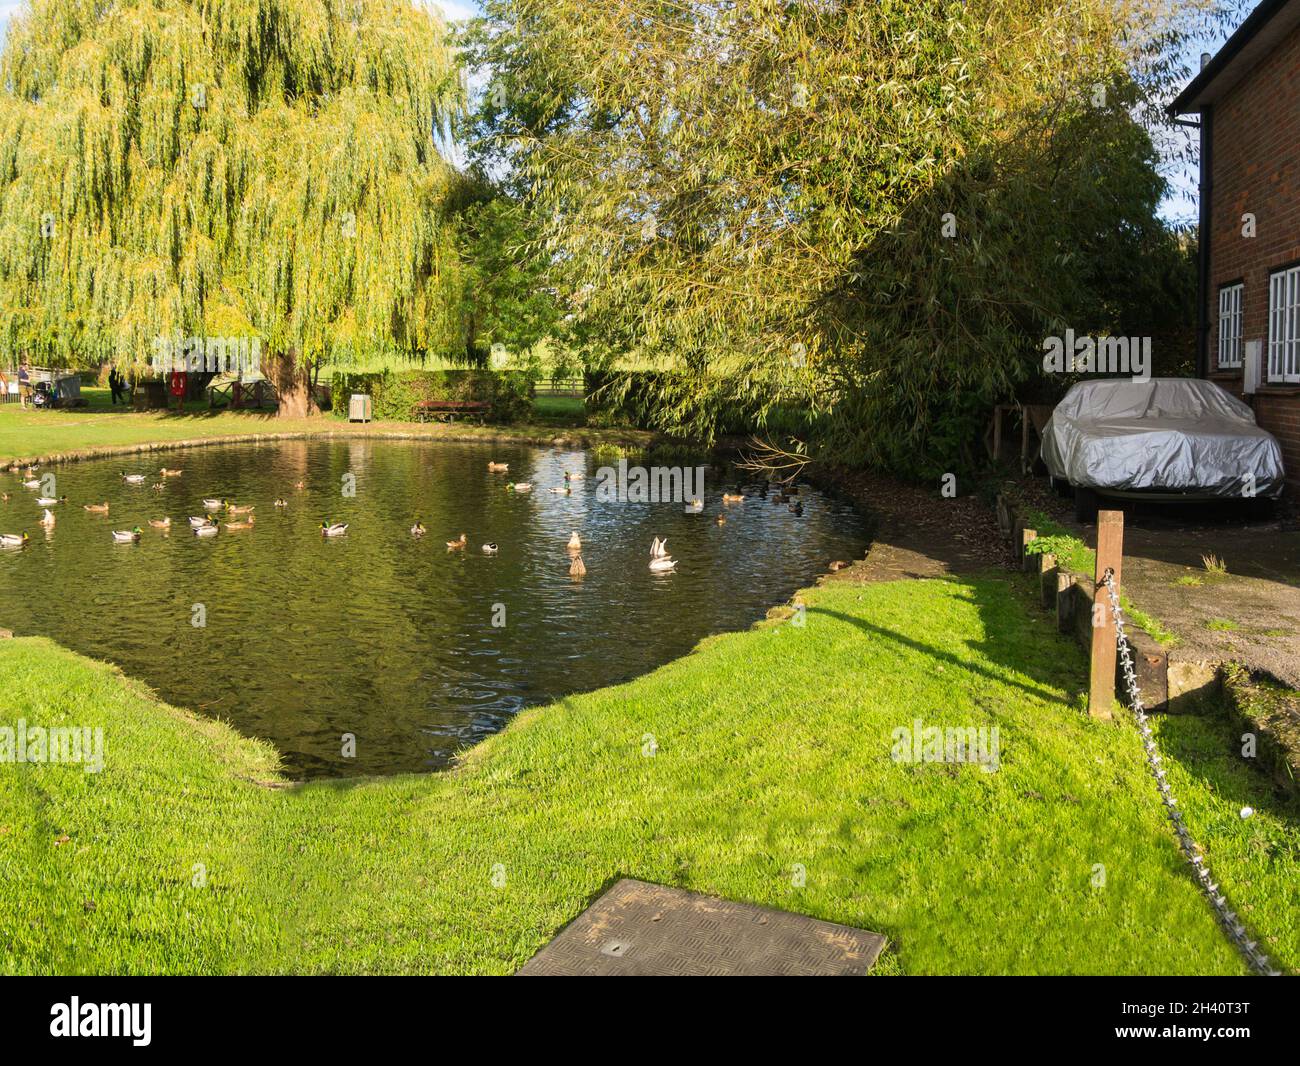 Duckpond in lovely village of Chalfont St Giles Buckinghamshire England UK on of the Chalfonts villages Stock Photo